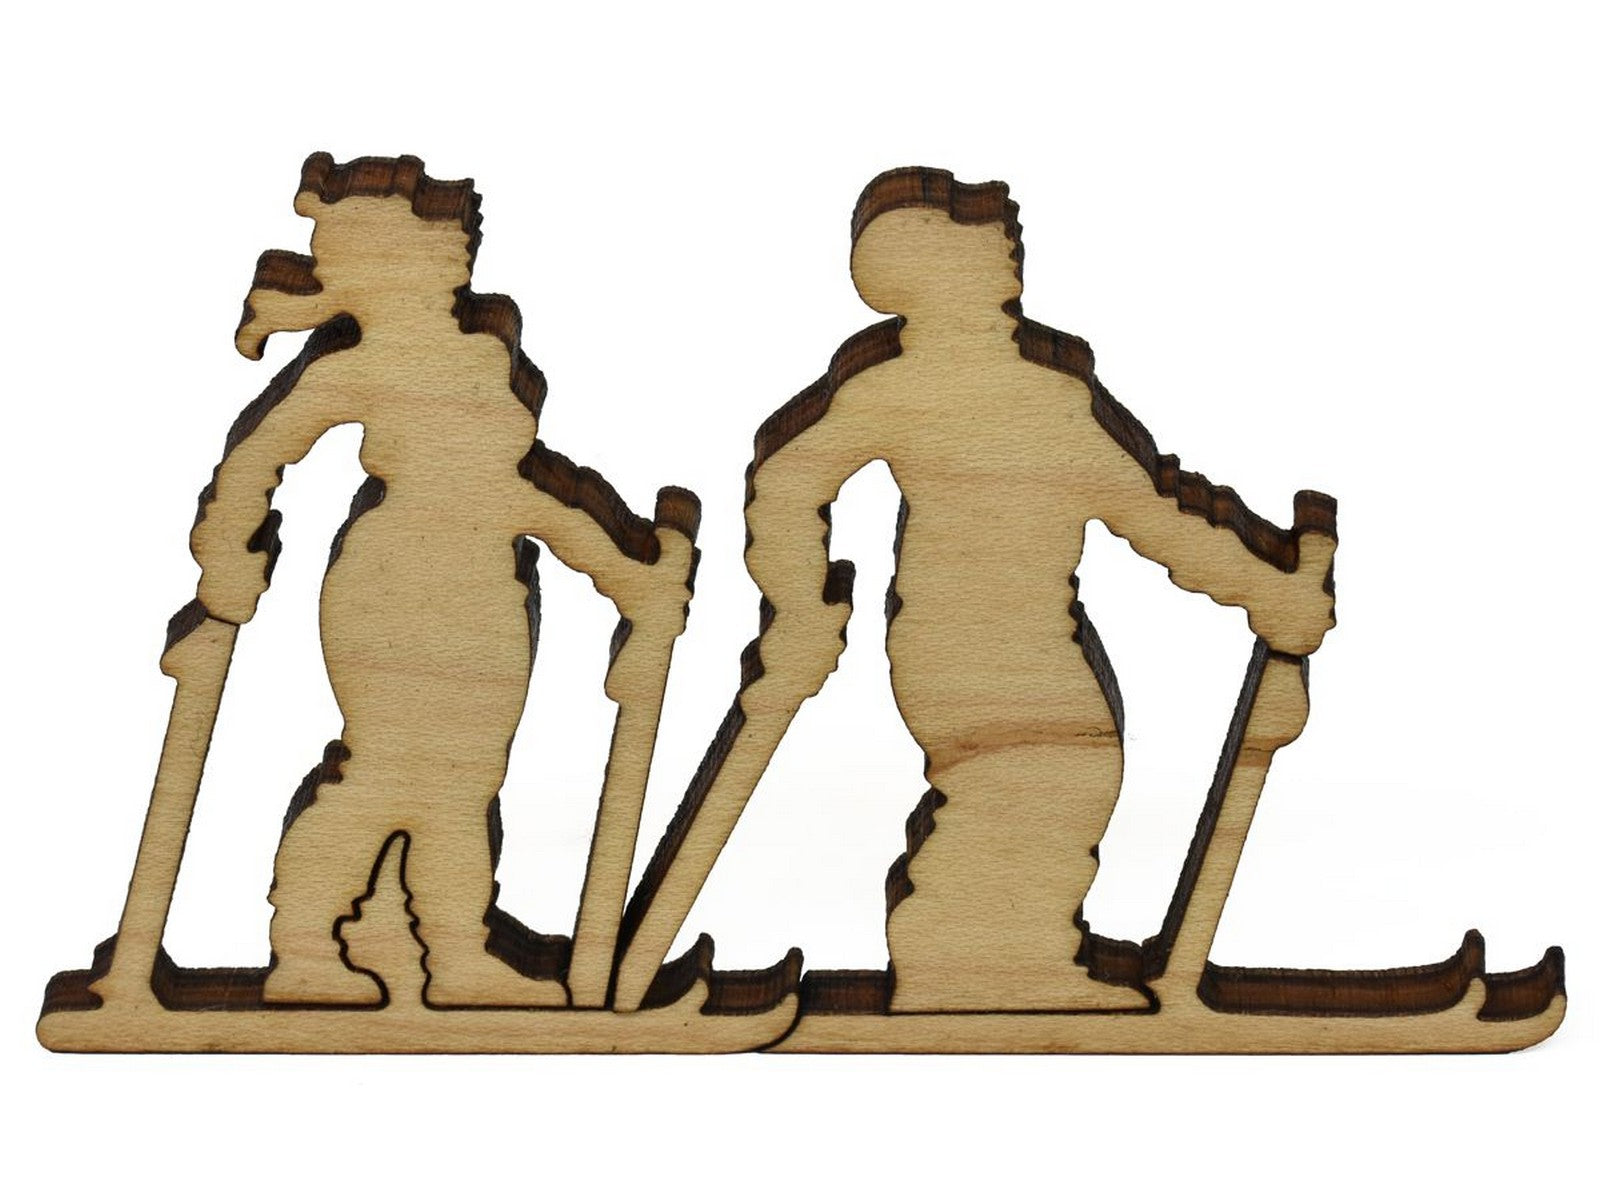 A closeup of pieces showing two cross country skiers.